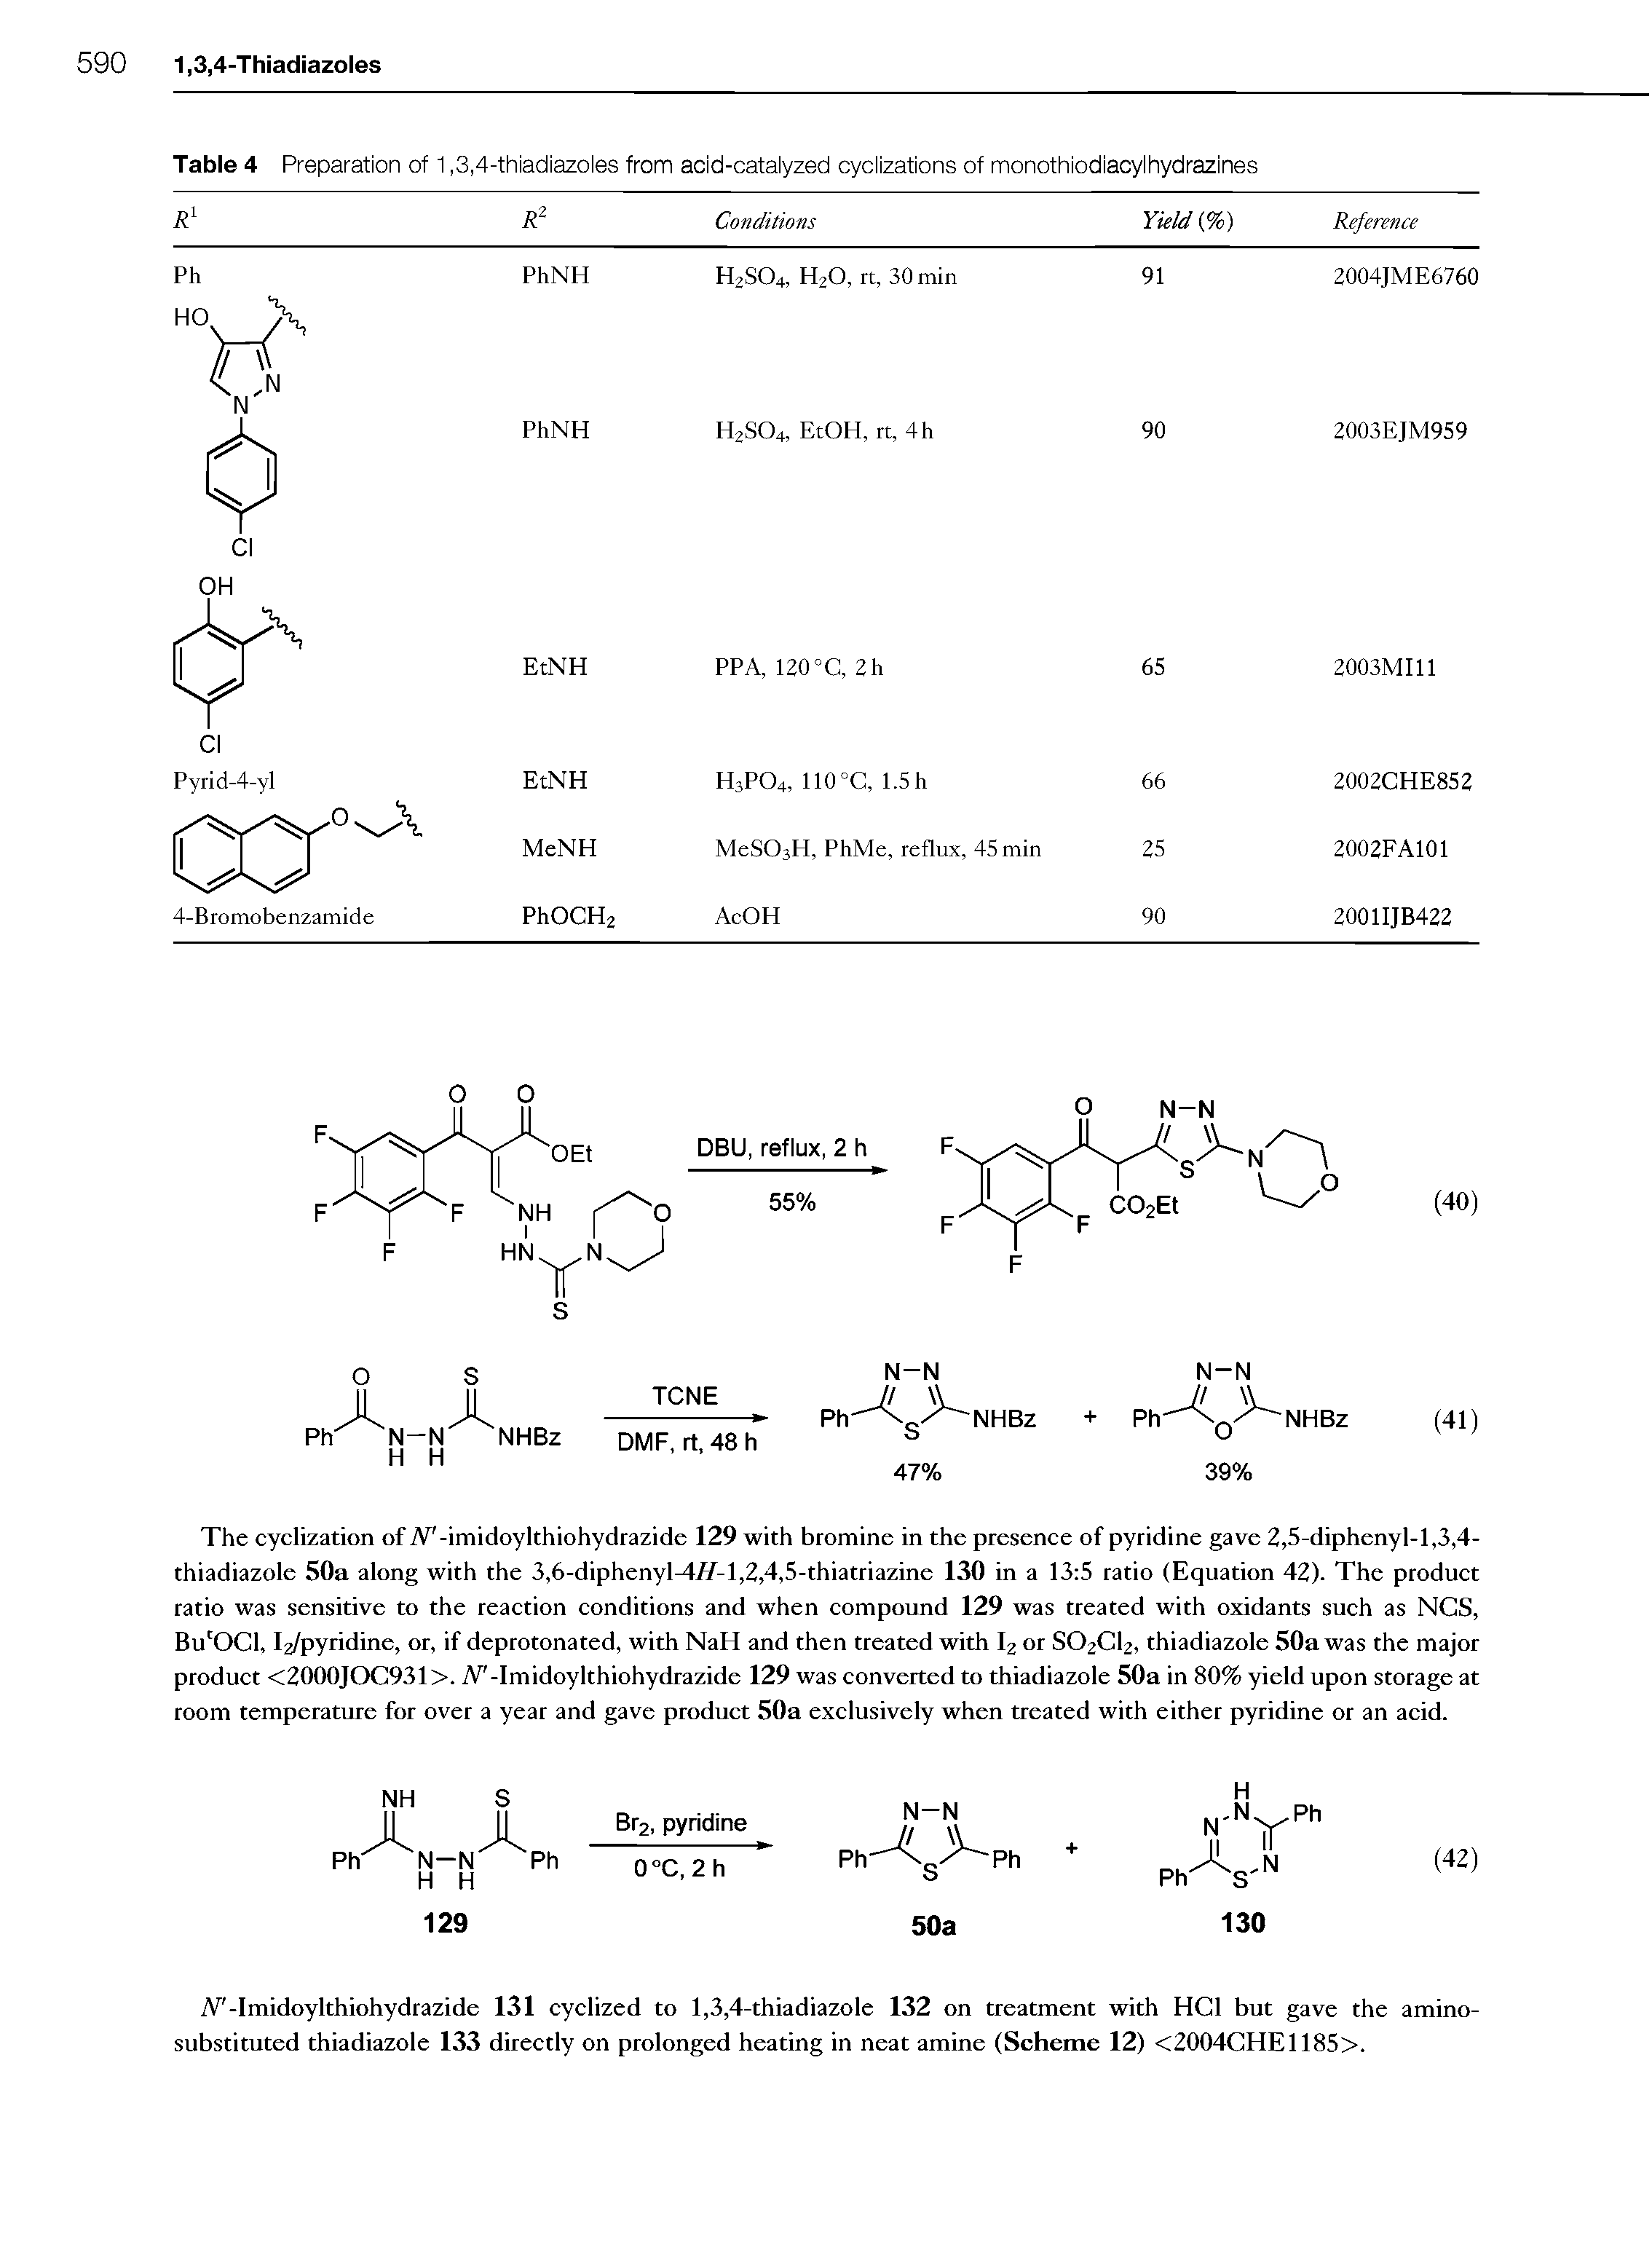 Table 4 Preparation of 1,3,4-thiadiazoles from acid-catalyzed cyclizations of monothiodiacylhydrazines...